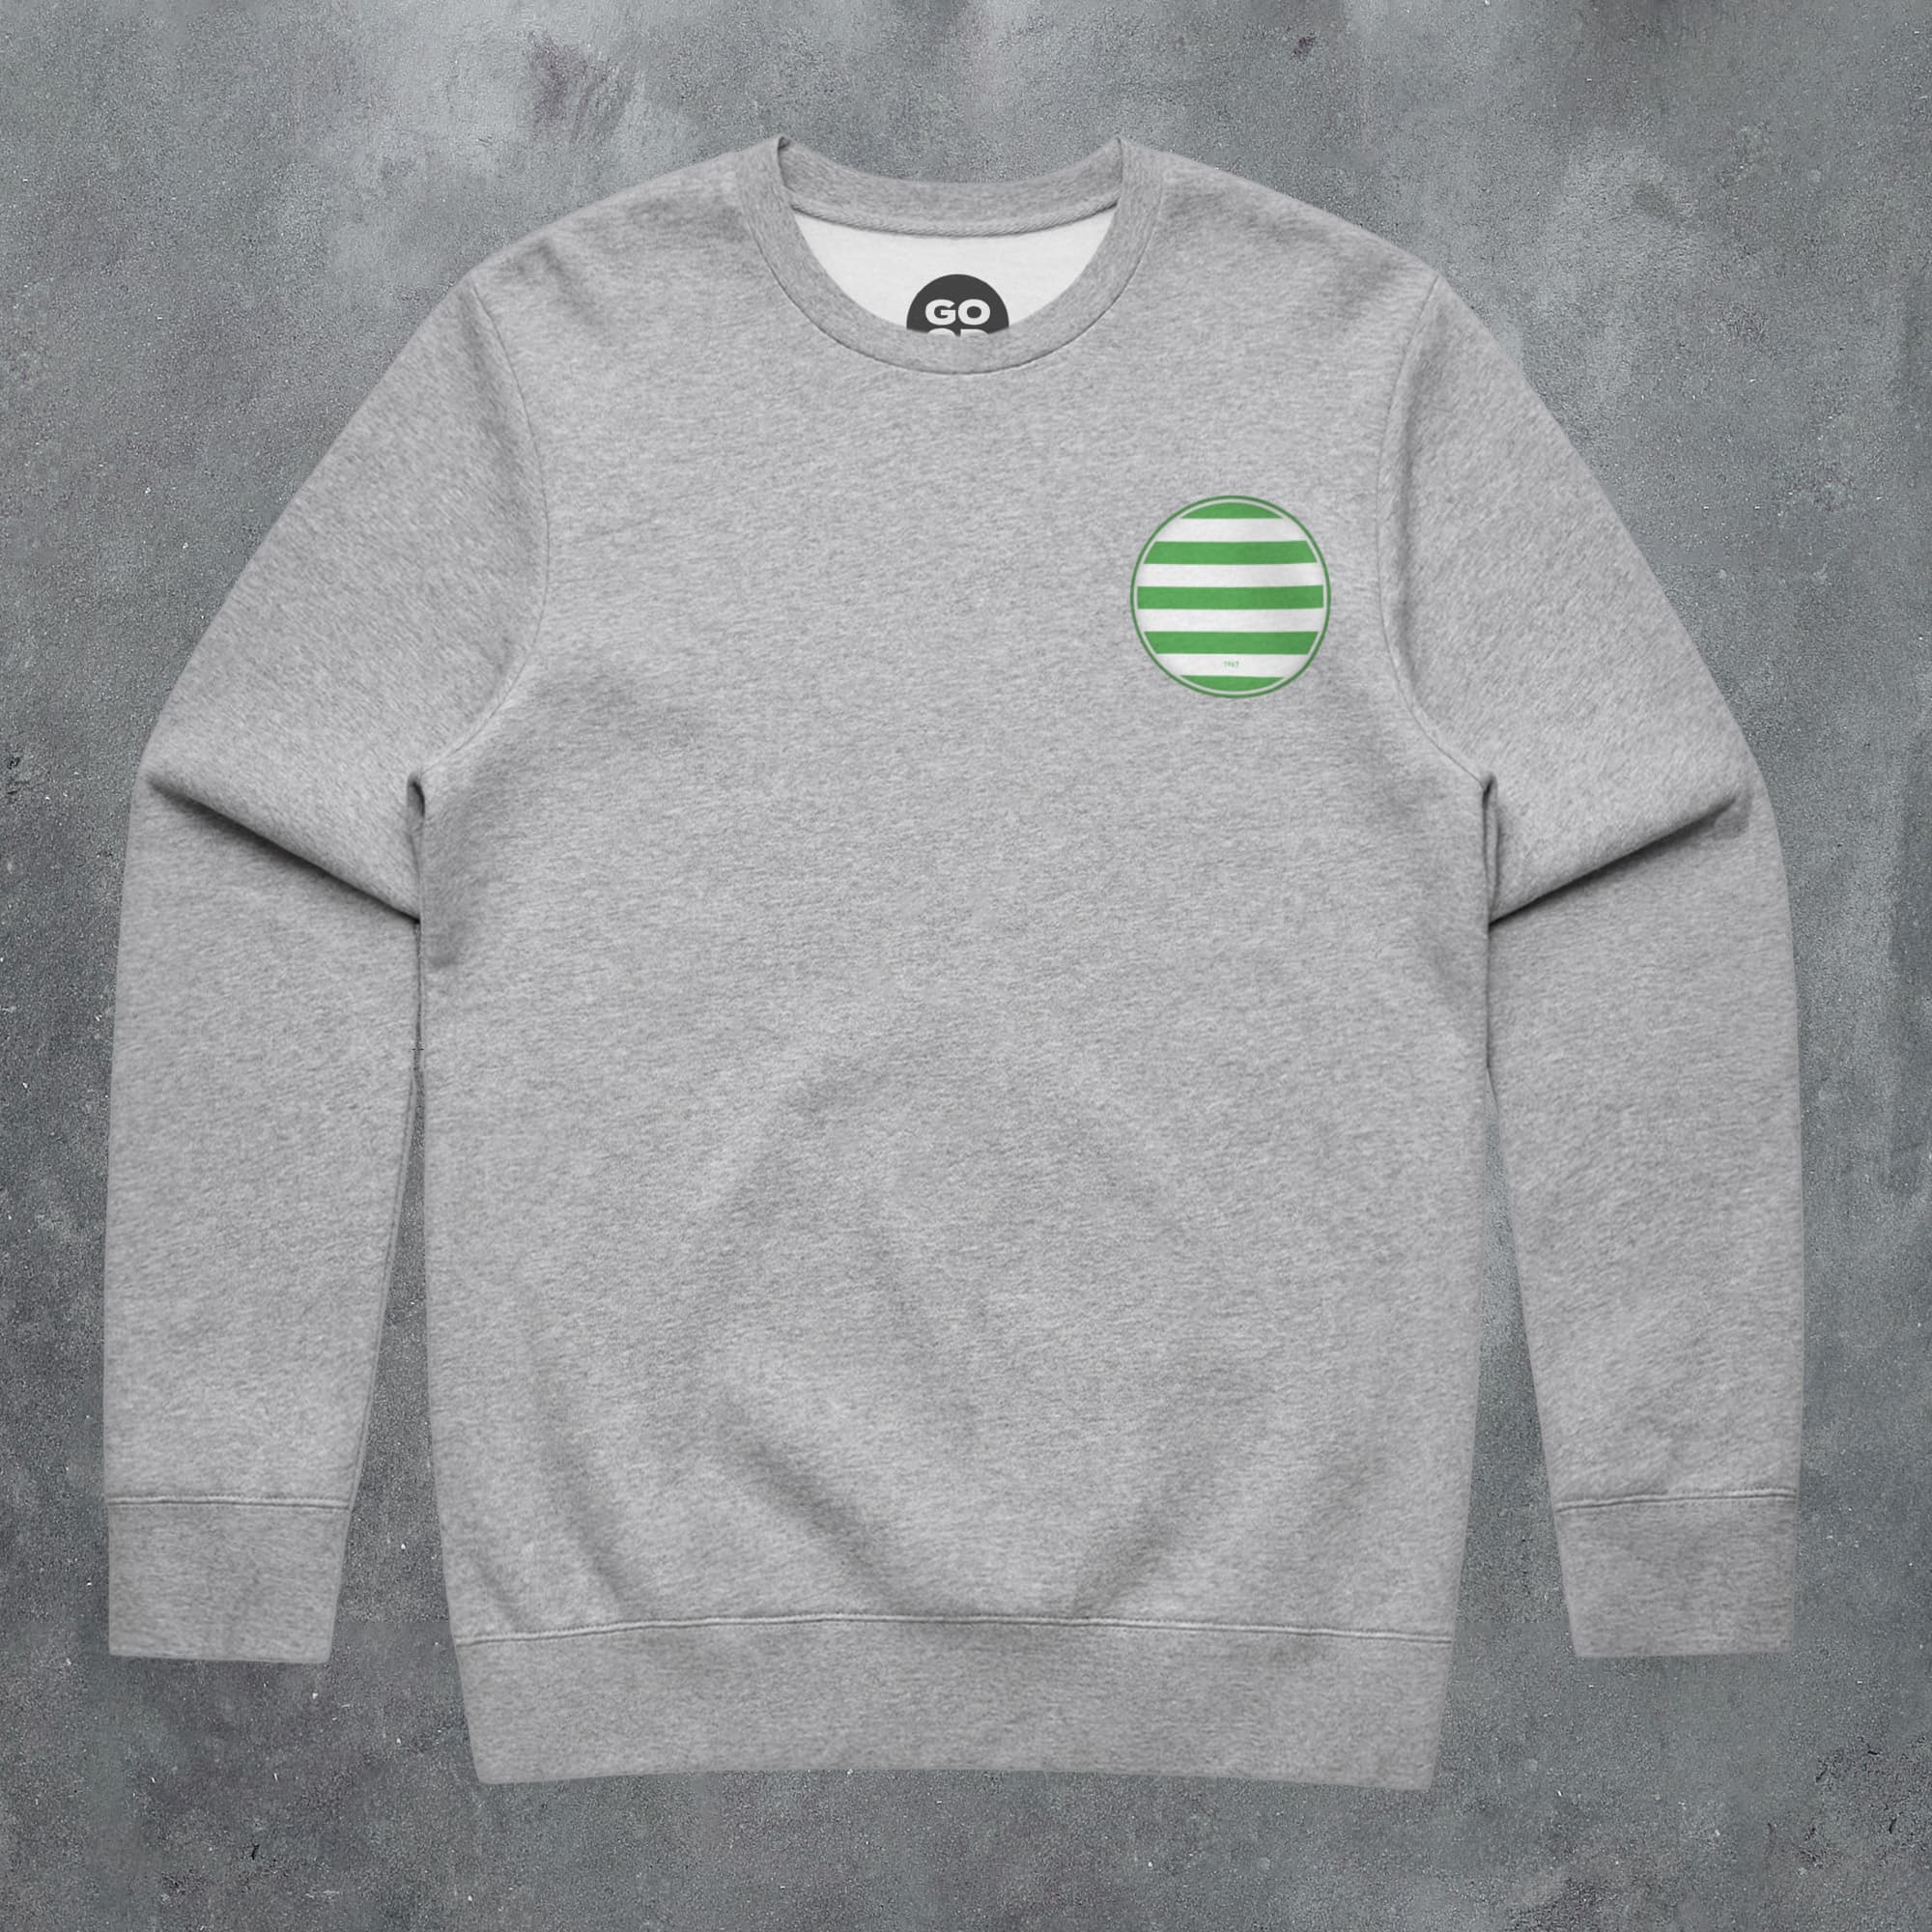 a grey sweatshirt with a green circle on the chest